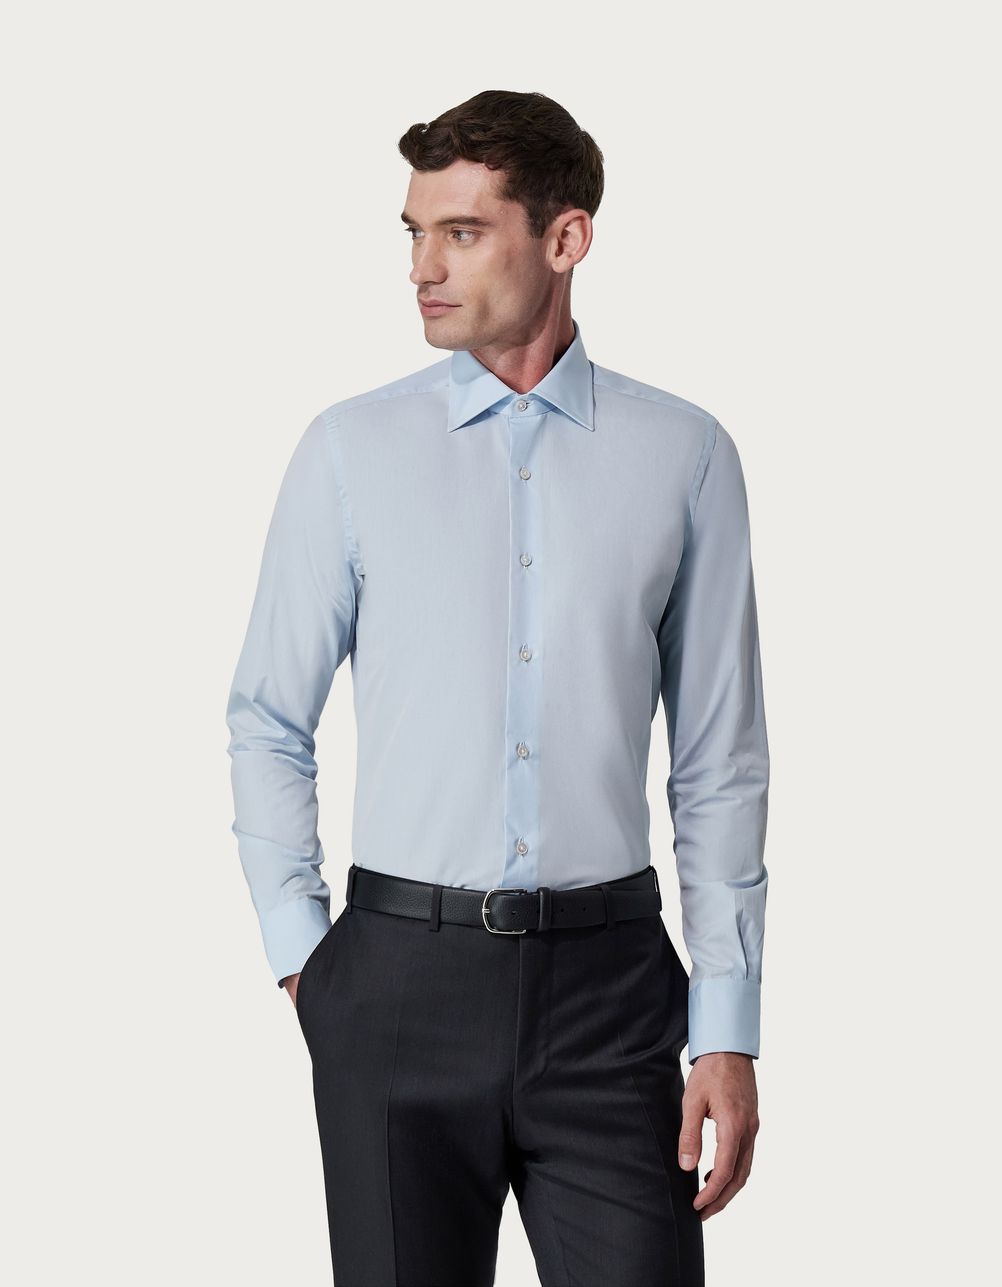 Modern fit shirt in light blue cotton - Exclusive